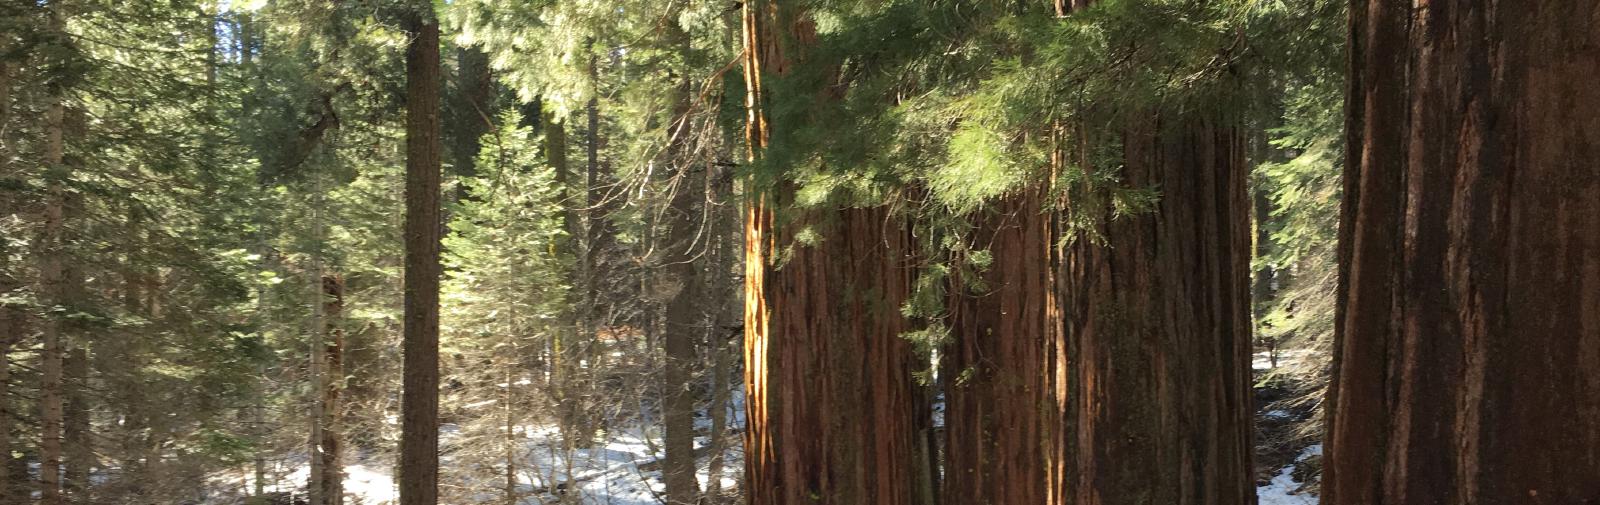 Beatiful Redwoods in Yosemite National Forest taken by a tour operator.